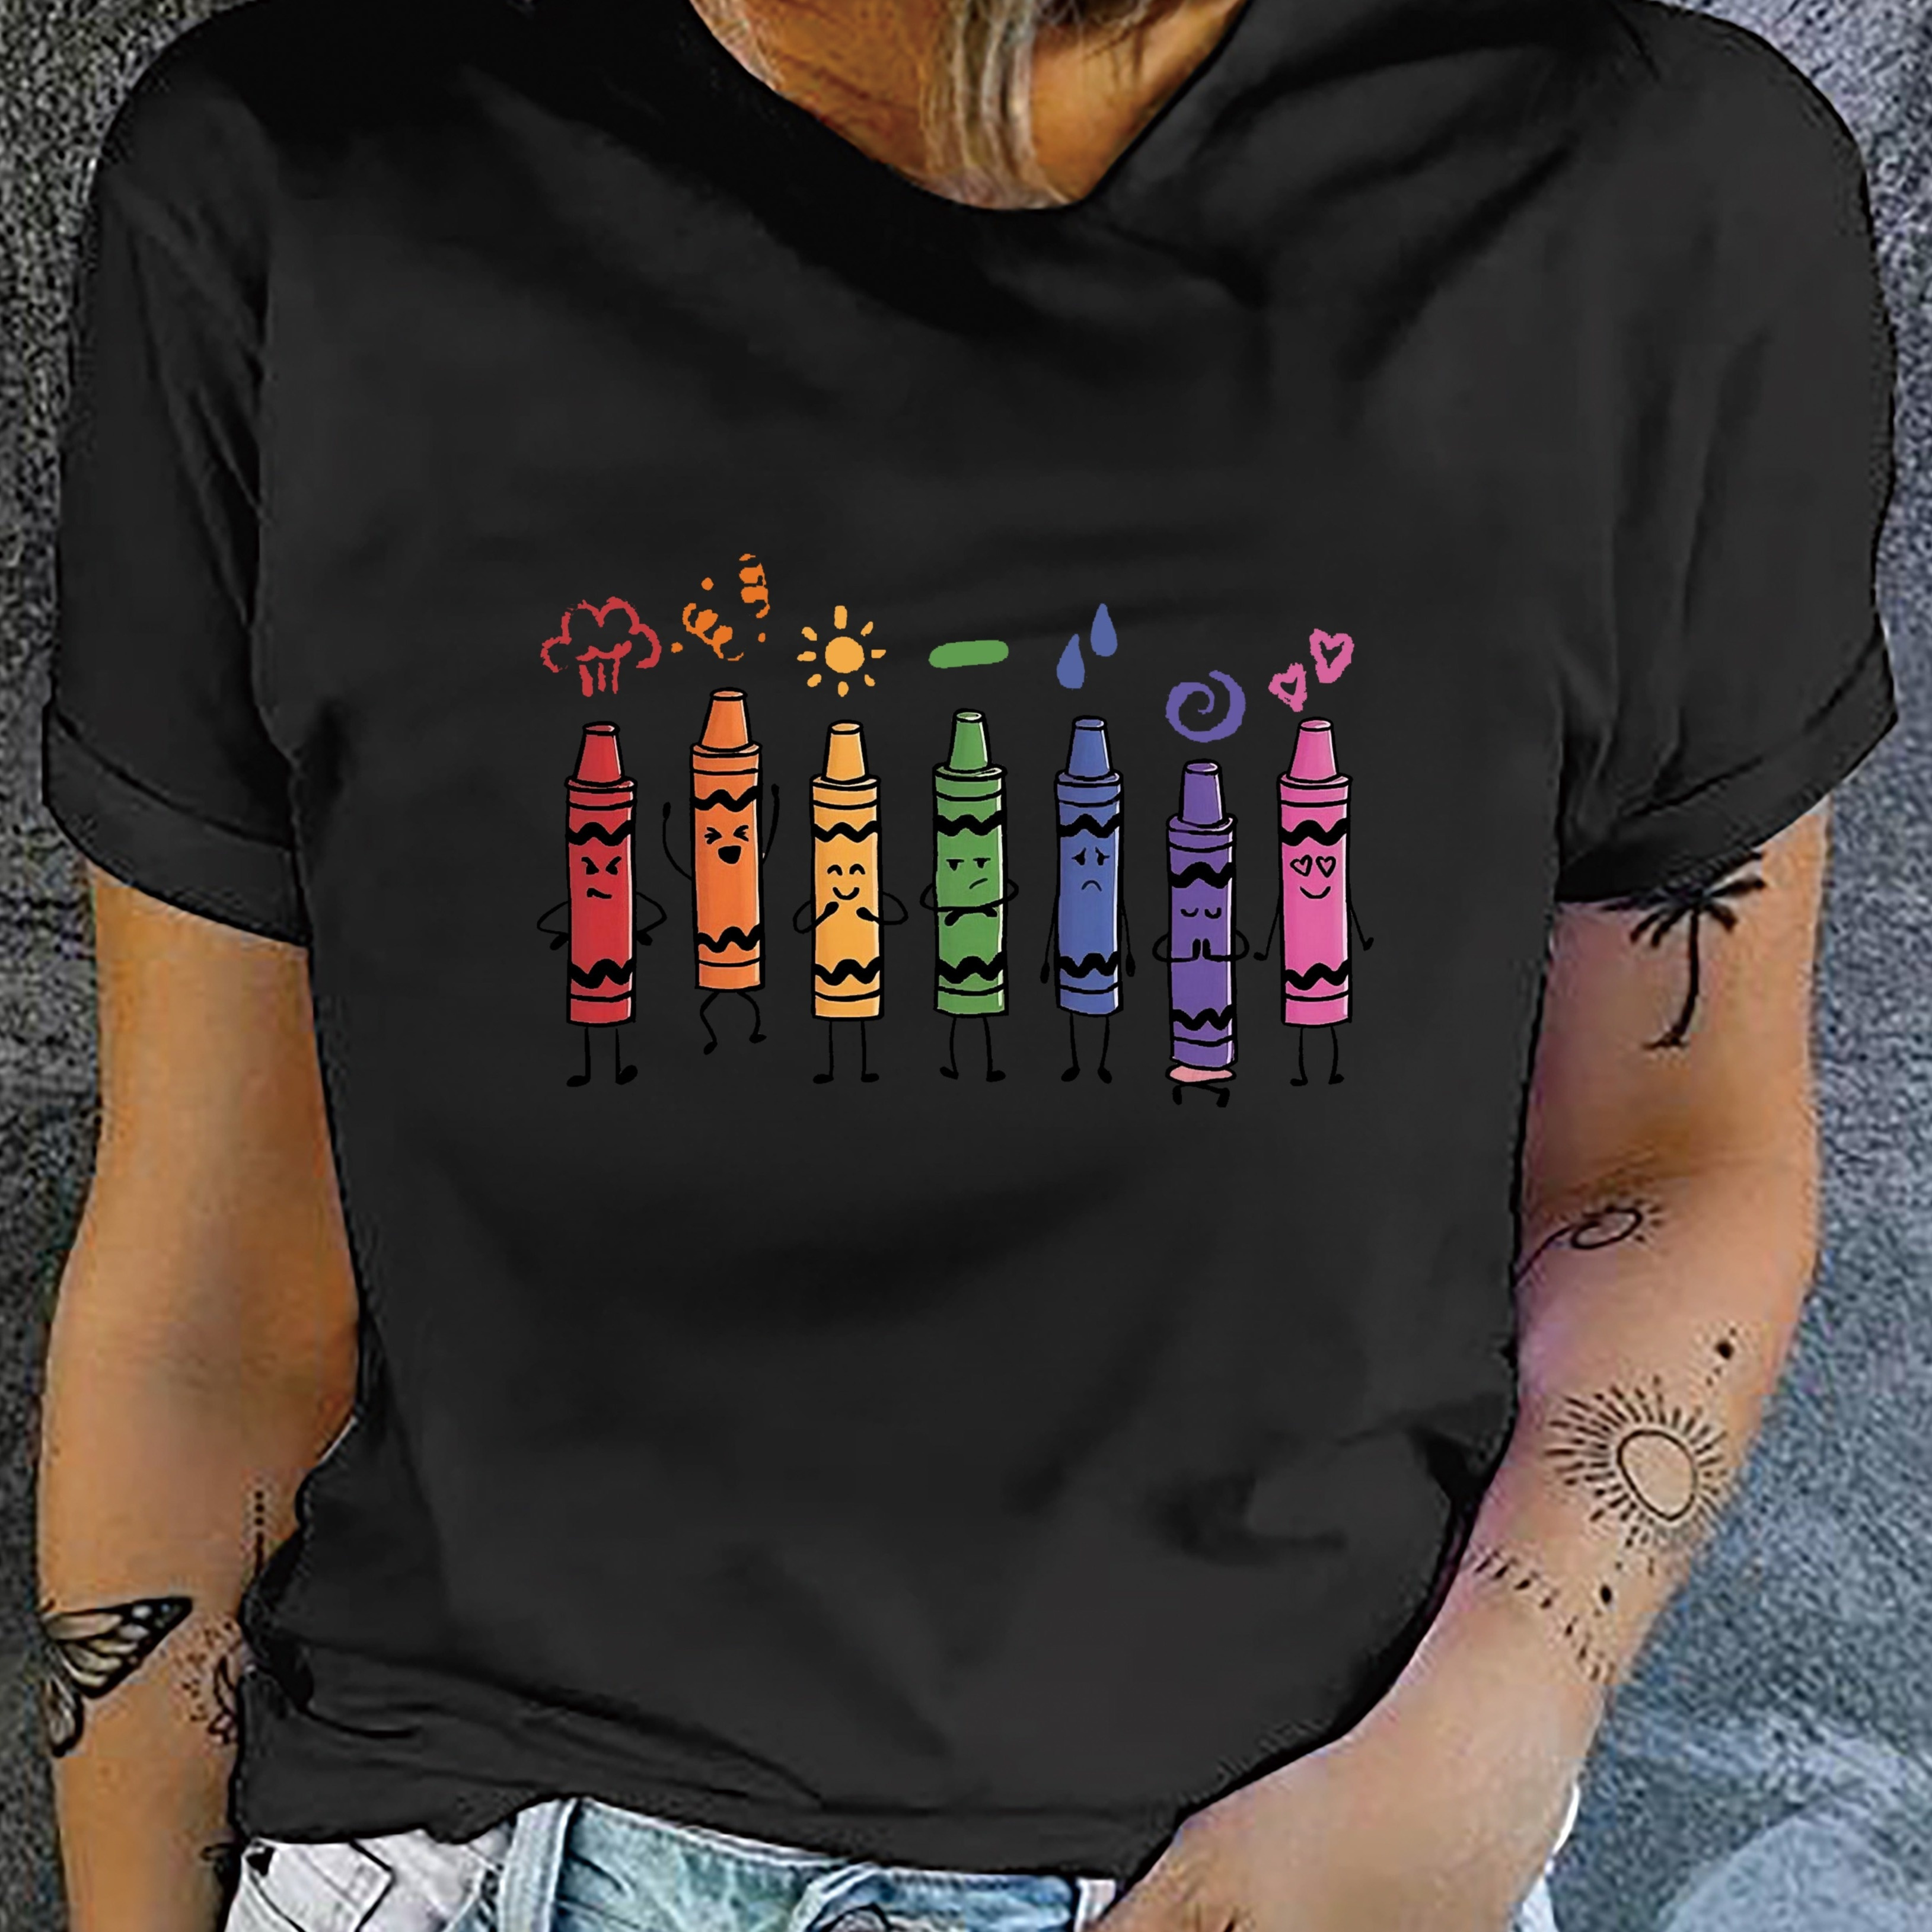 

Crayon Print T-shirt, Short Sleeve Crew Neck Casual Top For Summer & Spring, Women's Clothing